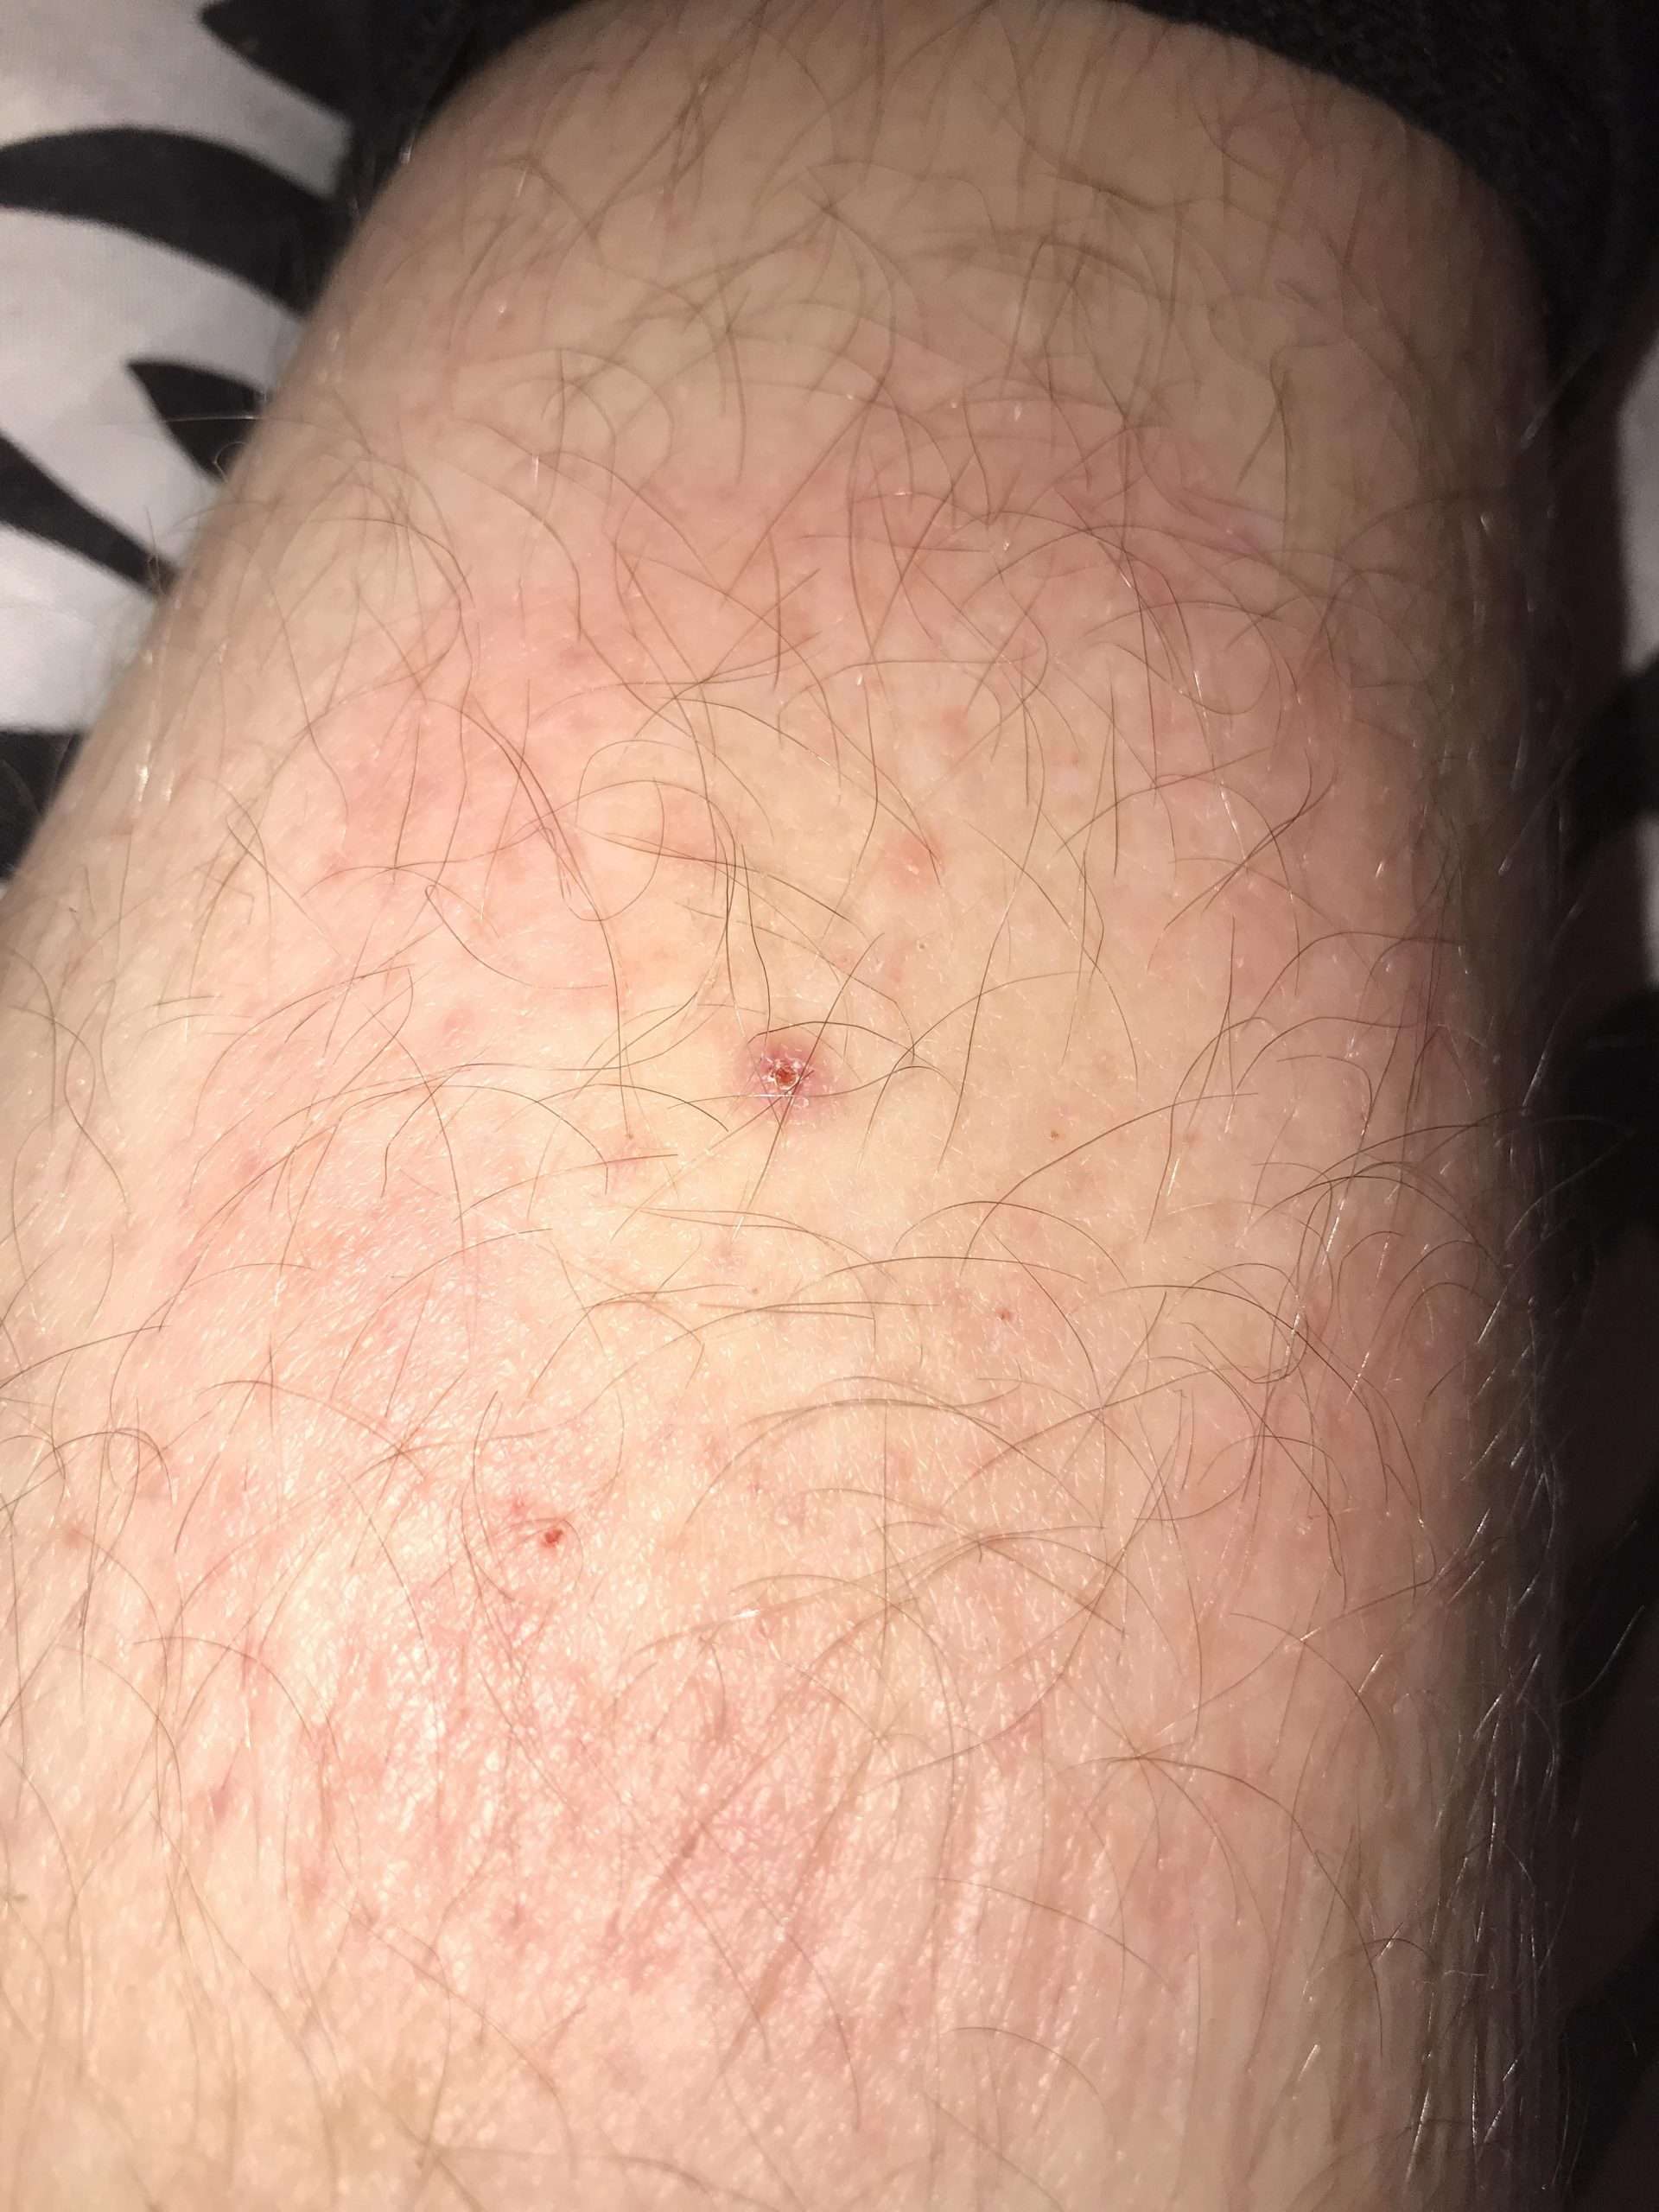 Help does anyone know if this is Lyme disease or some other kind of ...